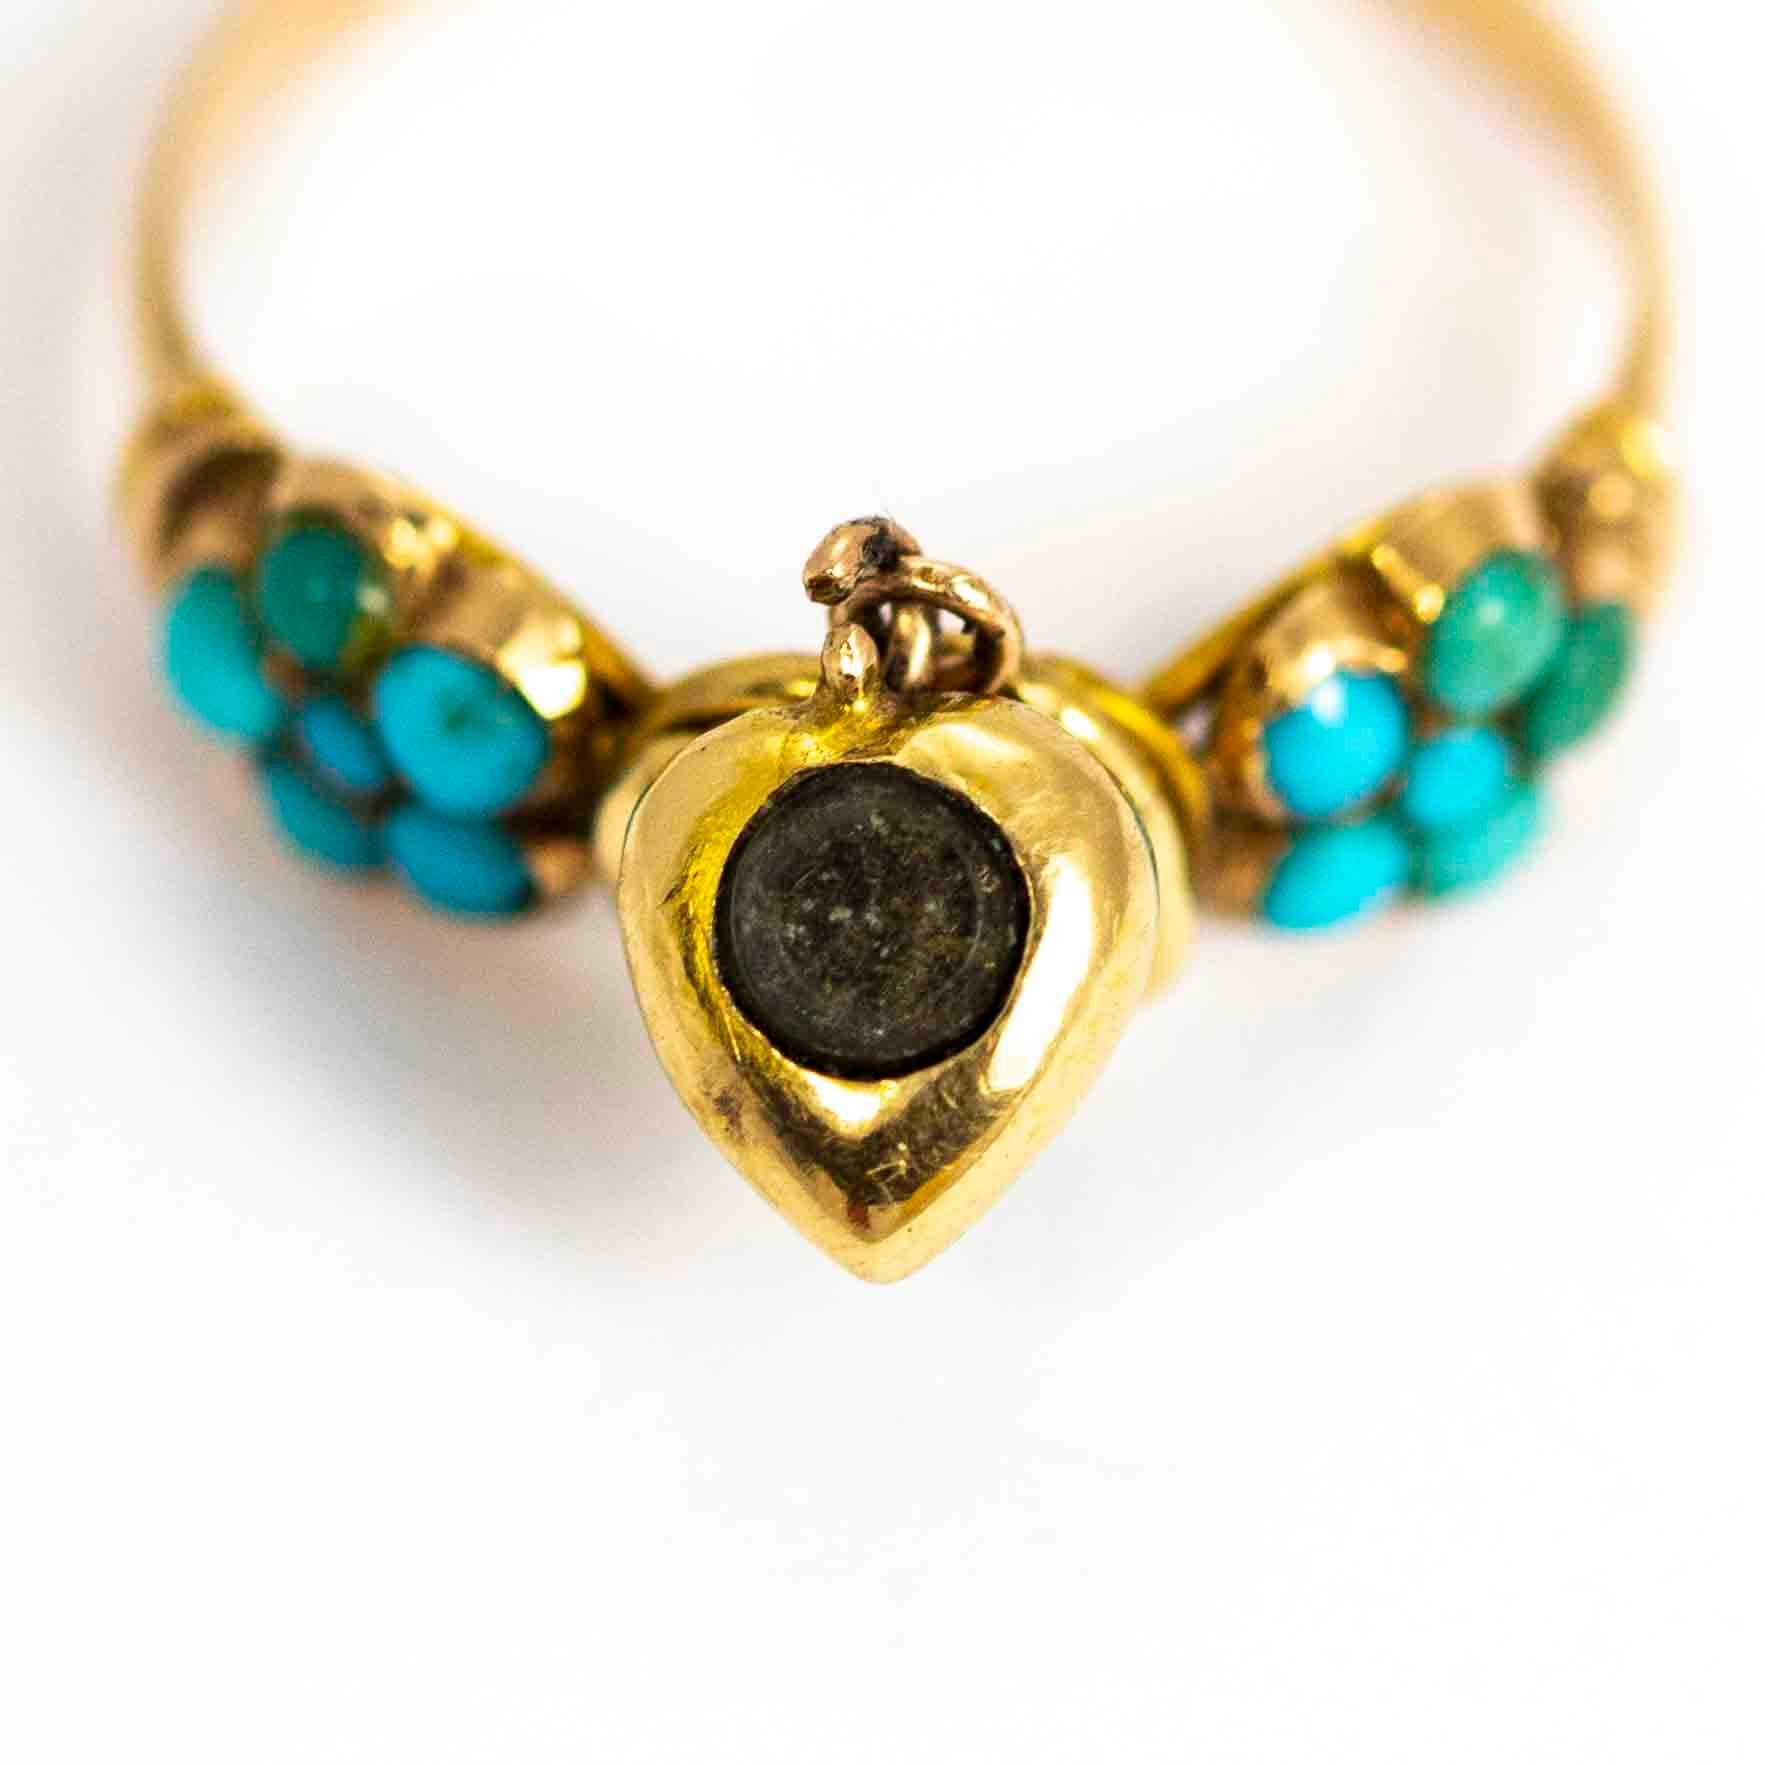 Vintage 15 Carat Gold Turquoise Lover's Knot Ring 2